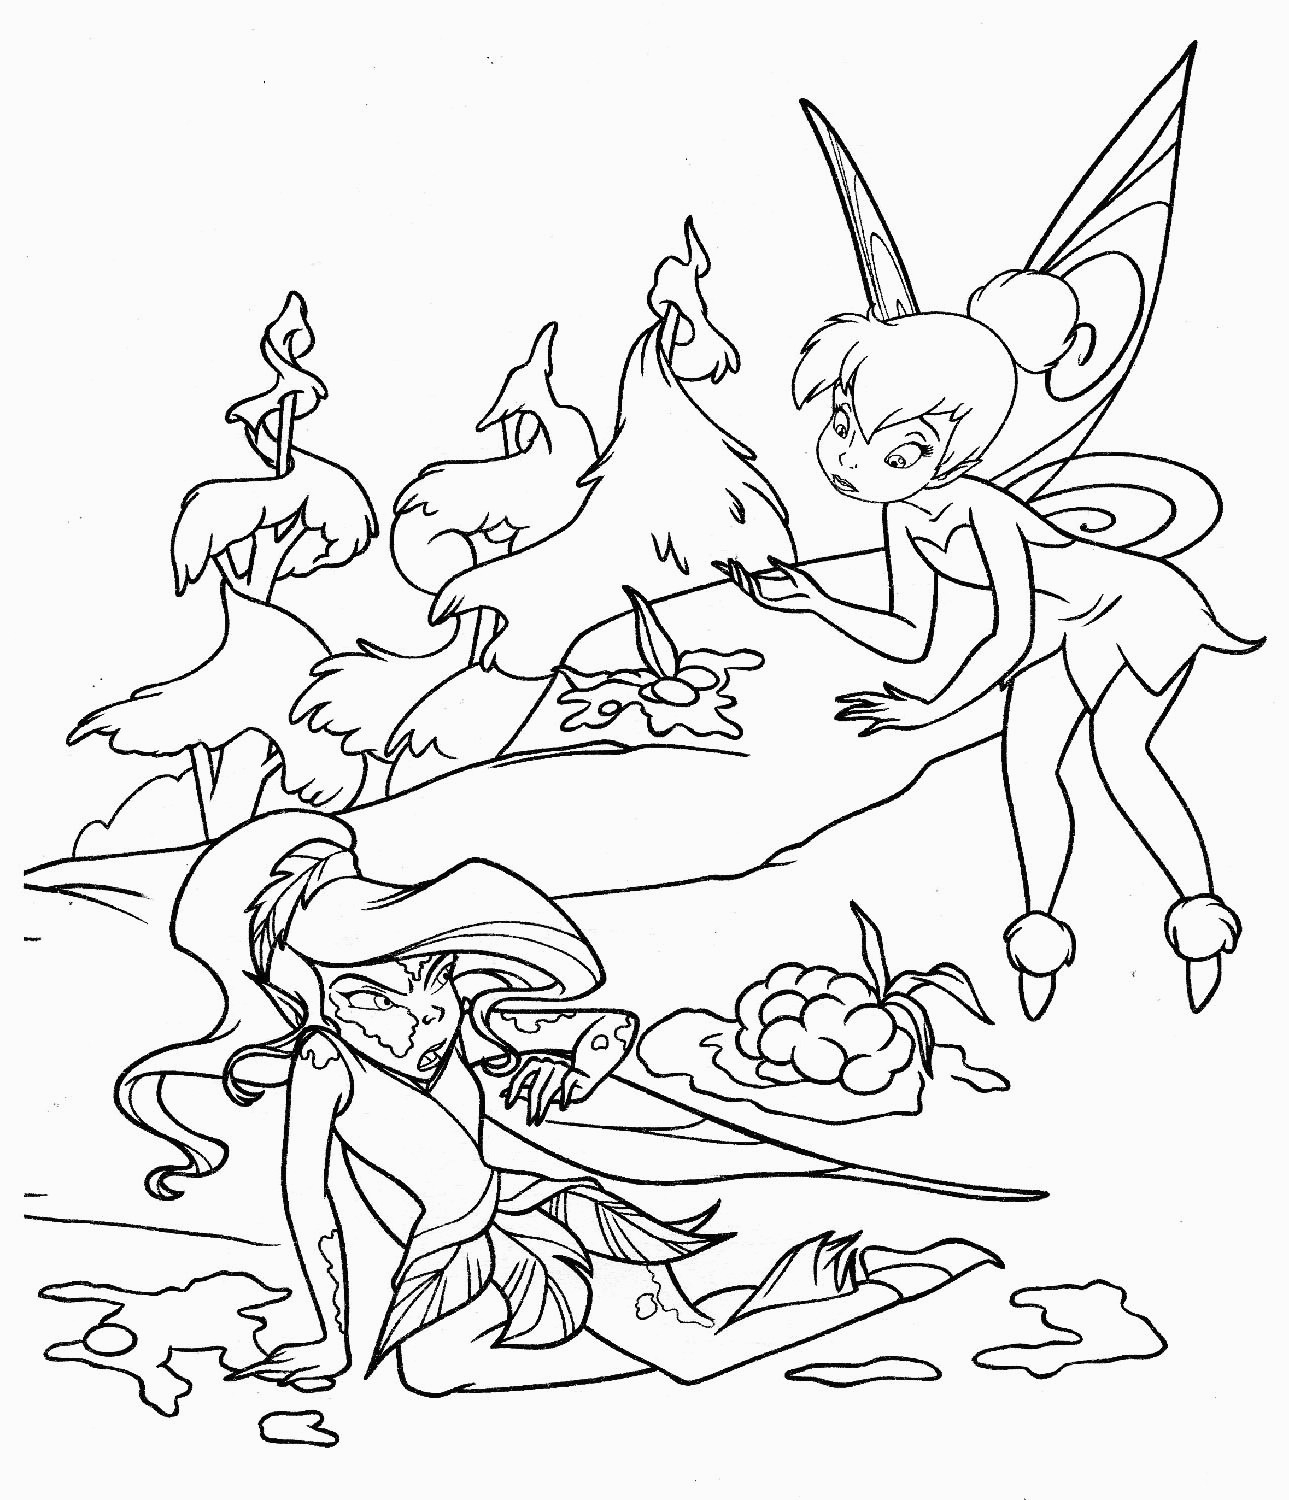 Free Printable Tinkerbell Coloring Pages For Kids For Tinkerbell - Tinkerbell Coloring Pages Printable Free